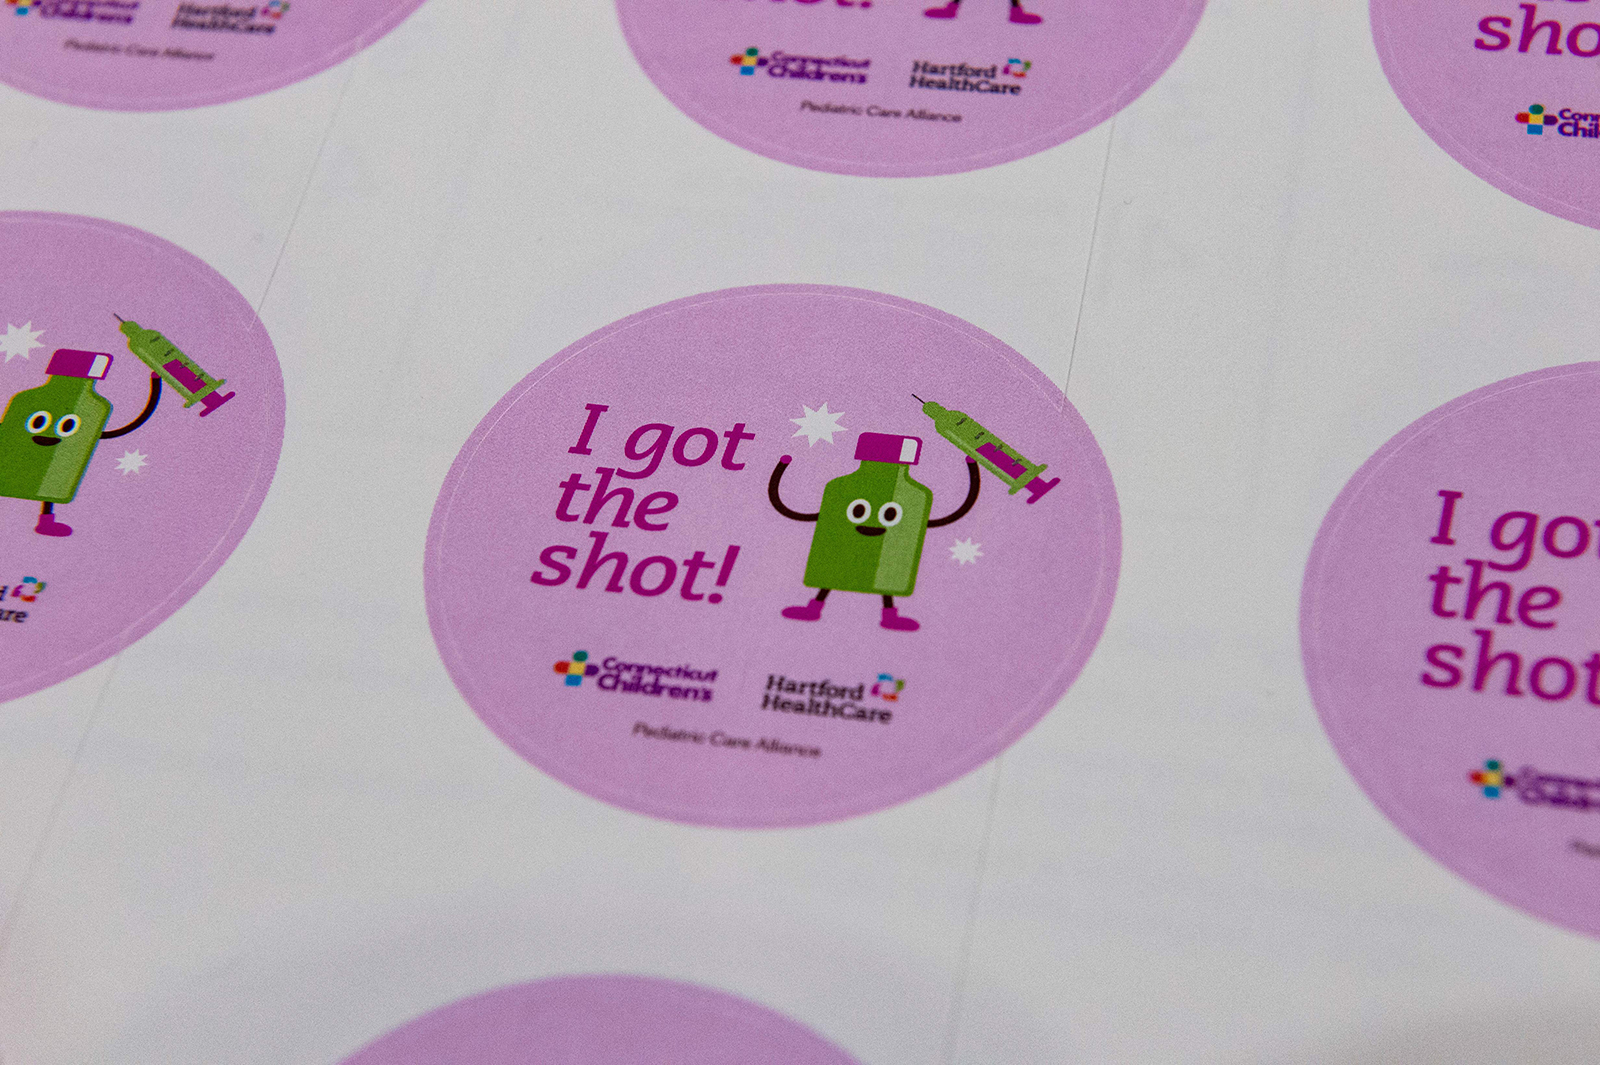 Stickers for children are seen ahead of full approval from the CDC for children to receive the Pfizer-BioNTech Covid-19 vaccine at Hartford Hospital in Hartford, Connecticut on November 2.